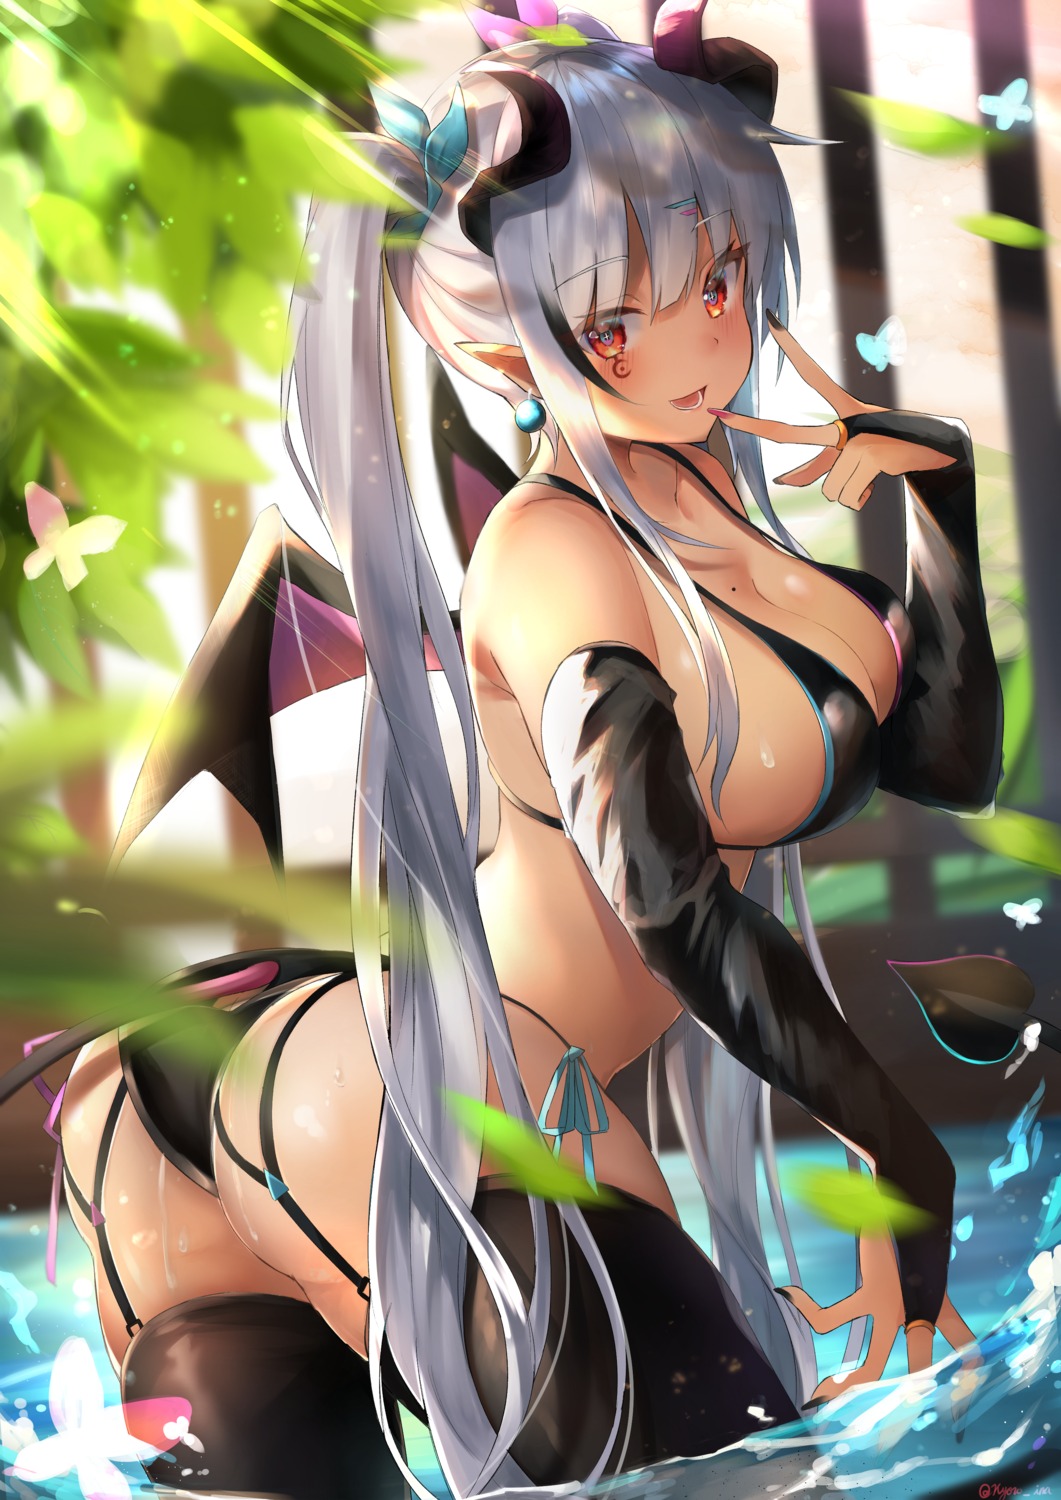 ass bikini cameltoe devil horns kyoro_ina pointy_ears stockings swimsuits tail thighhighs wet wings